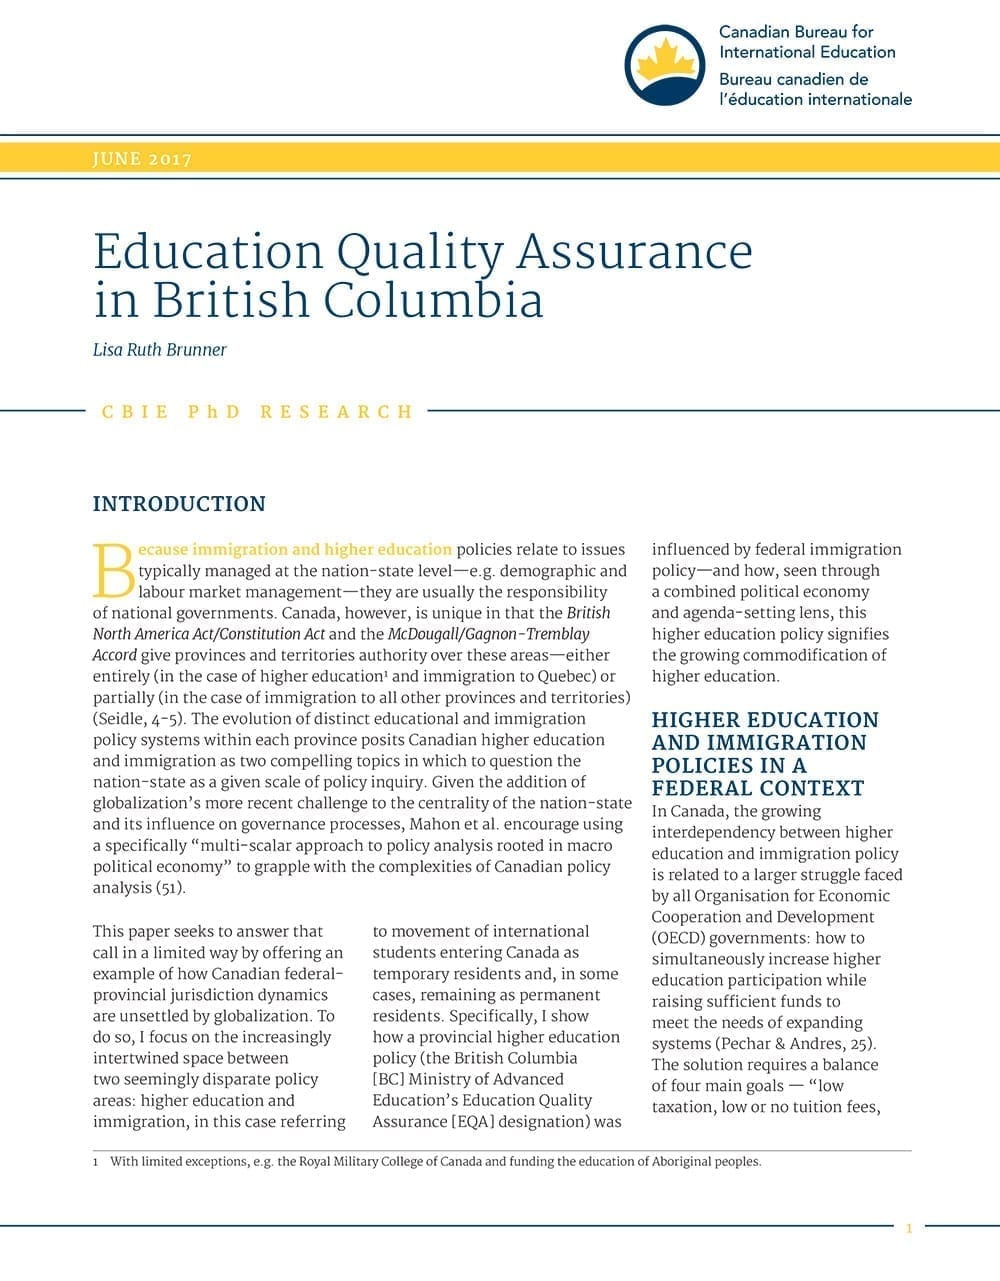 Education Quality Assurance in British Columbia